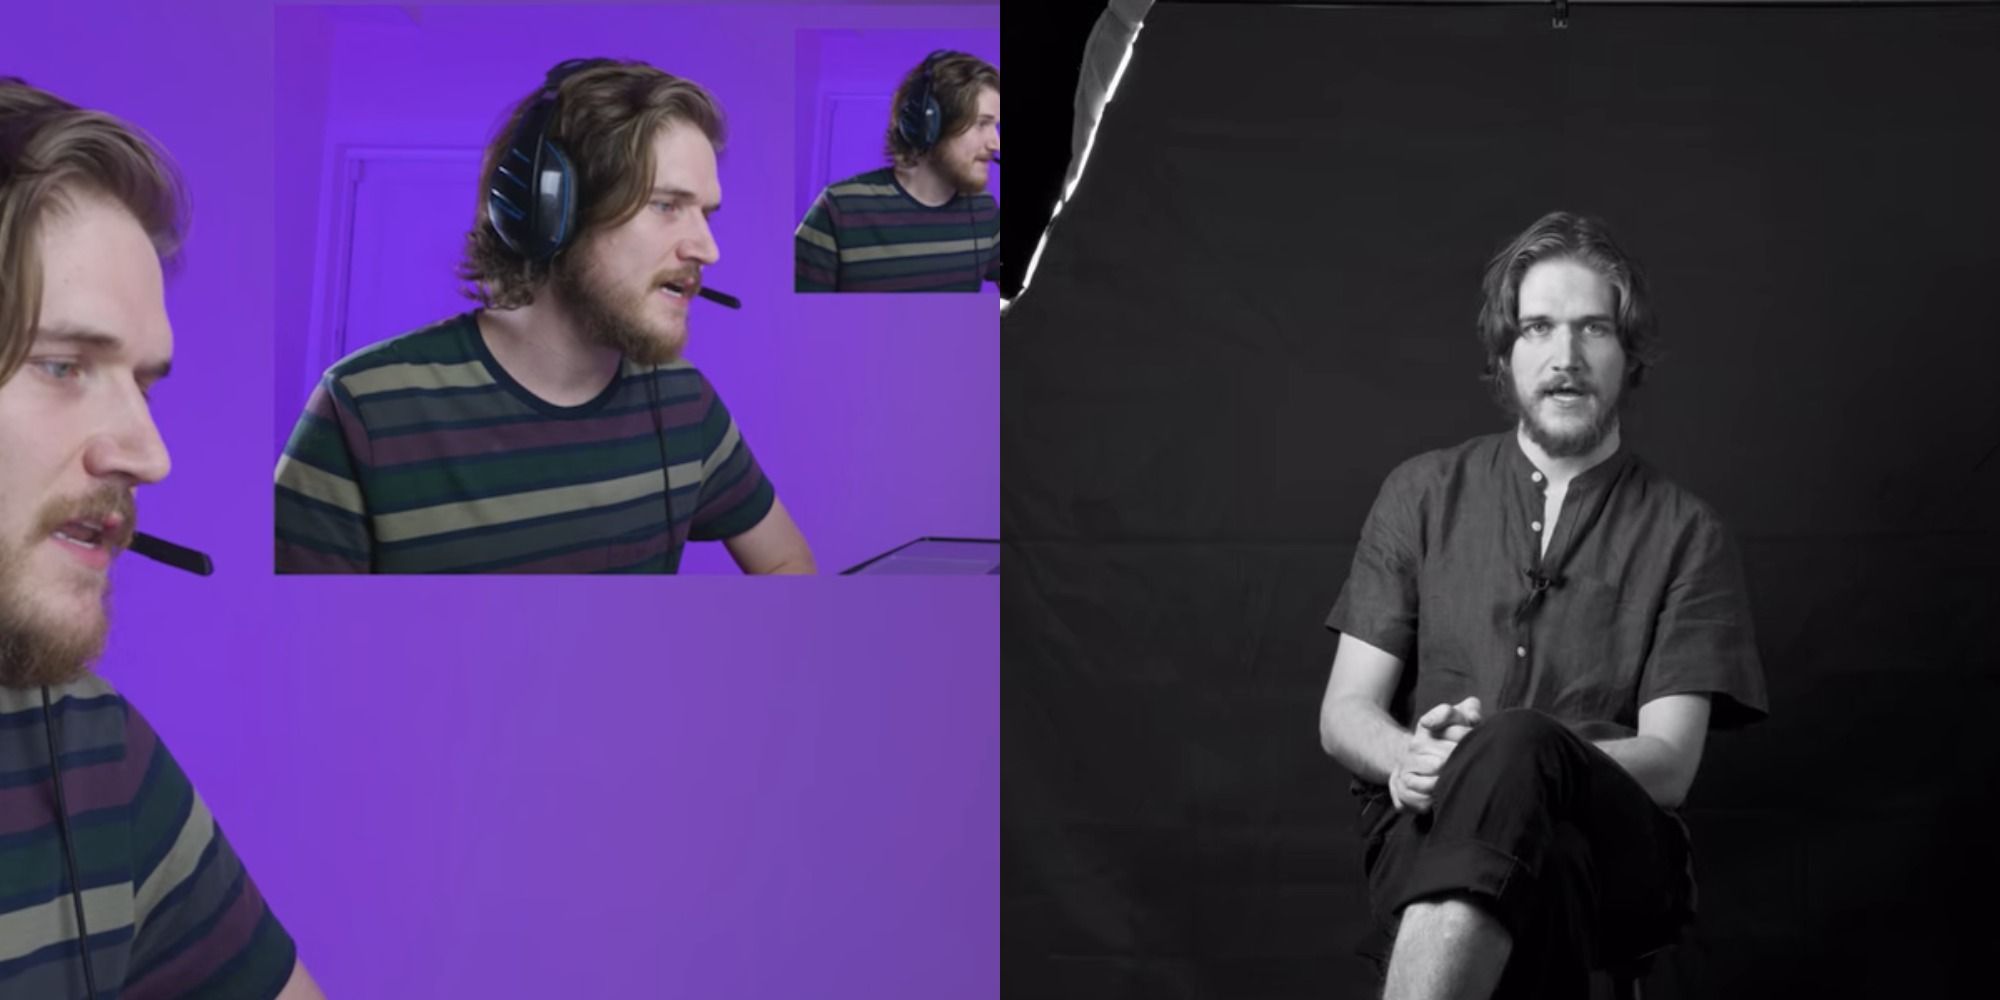 Split image of Bo Burnham reaction video, and his sketch about a social media consultant